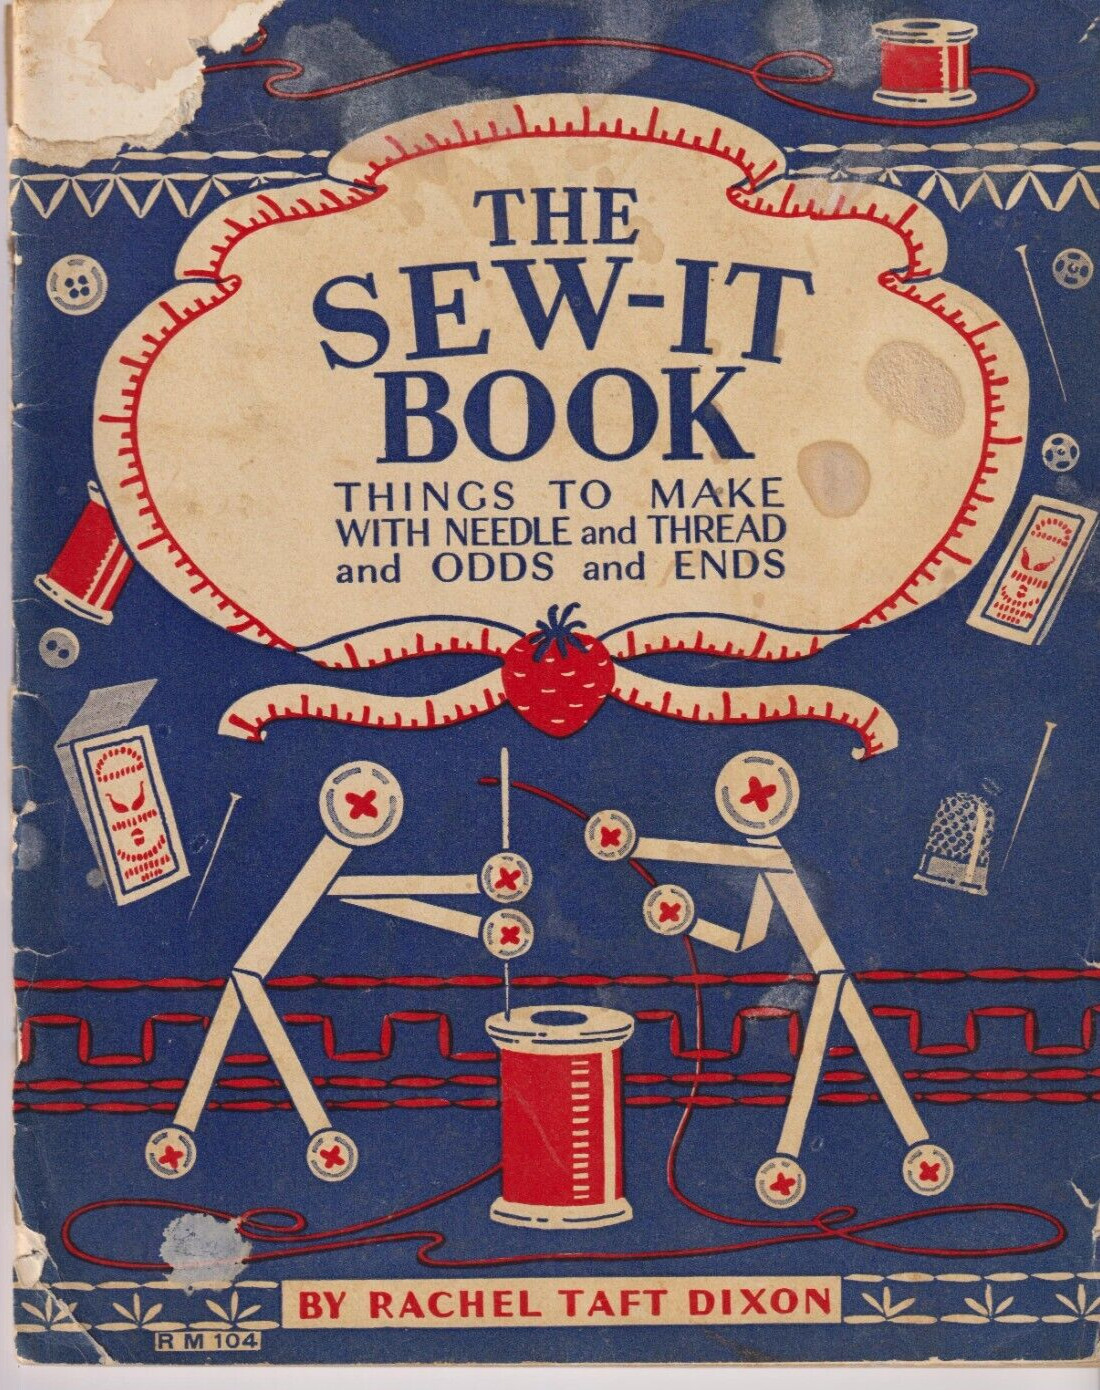 The SEW IT BOOK c.1929 - Crafts to Make - 47 pages